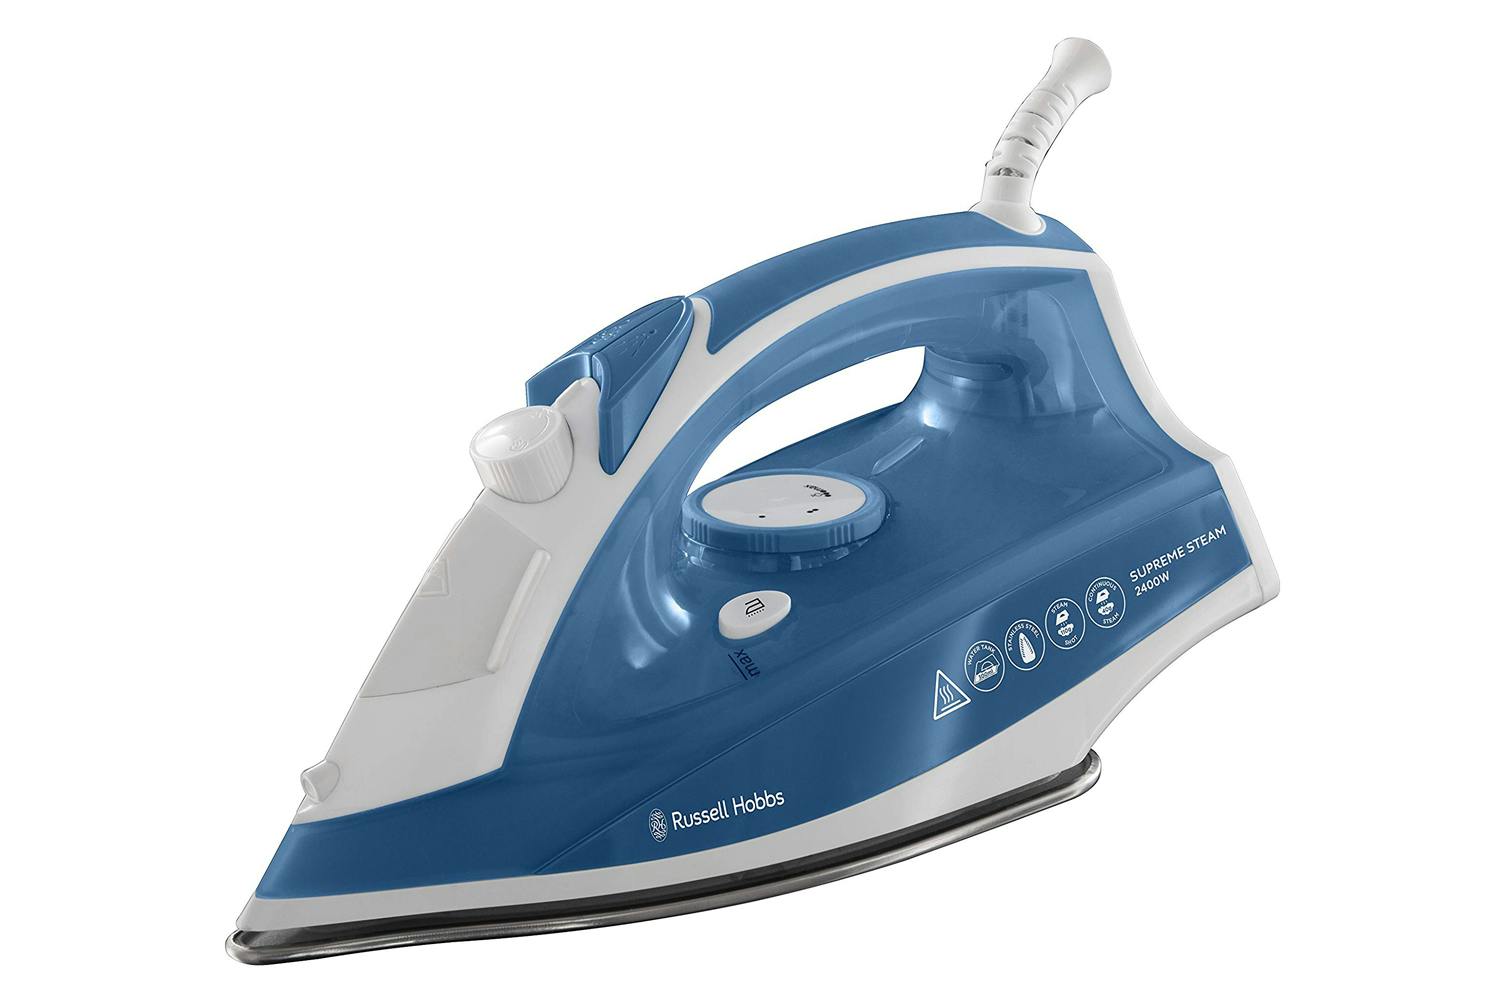 Russell Hobbs 2400W Supreme Steam Traditional Iron | 23061 | White/Blue